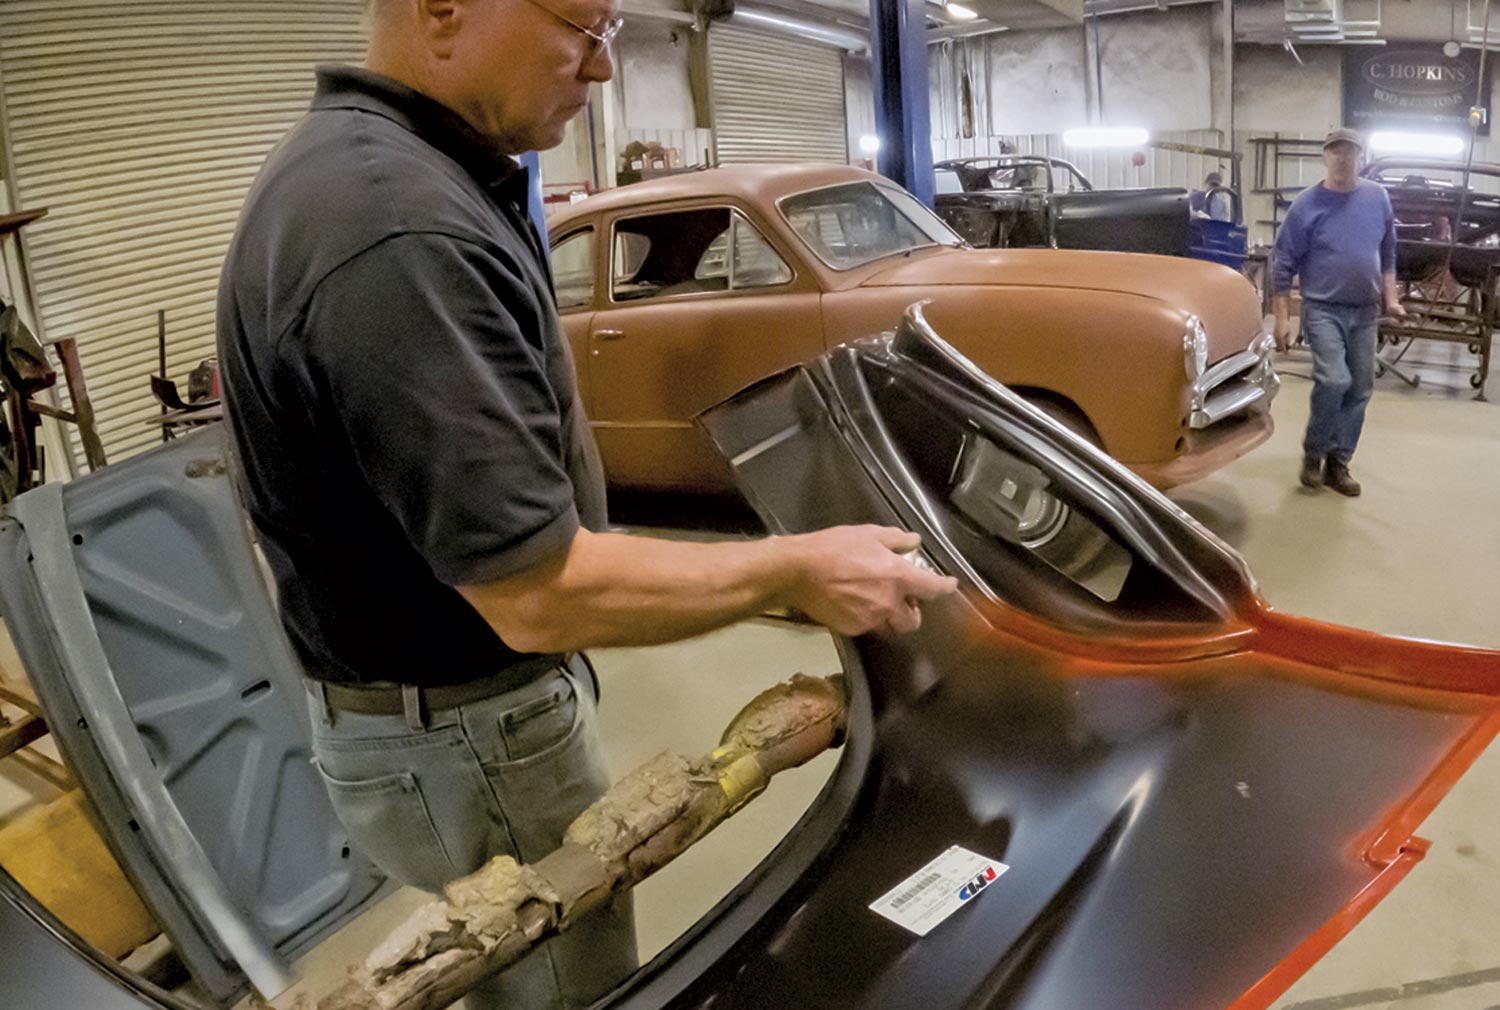 another mechanic applies weld-through primer on a quarter-panel prior to installation